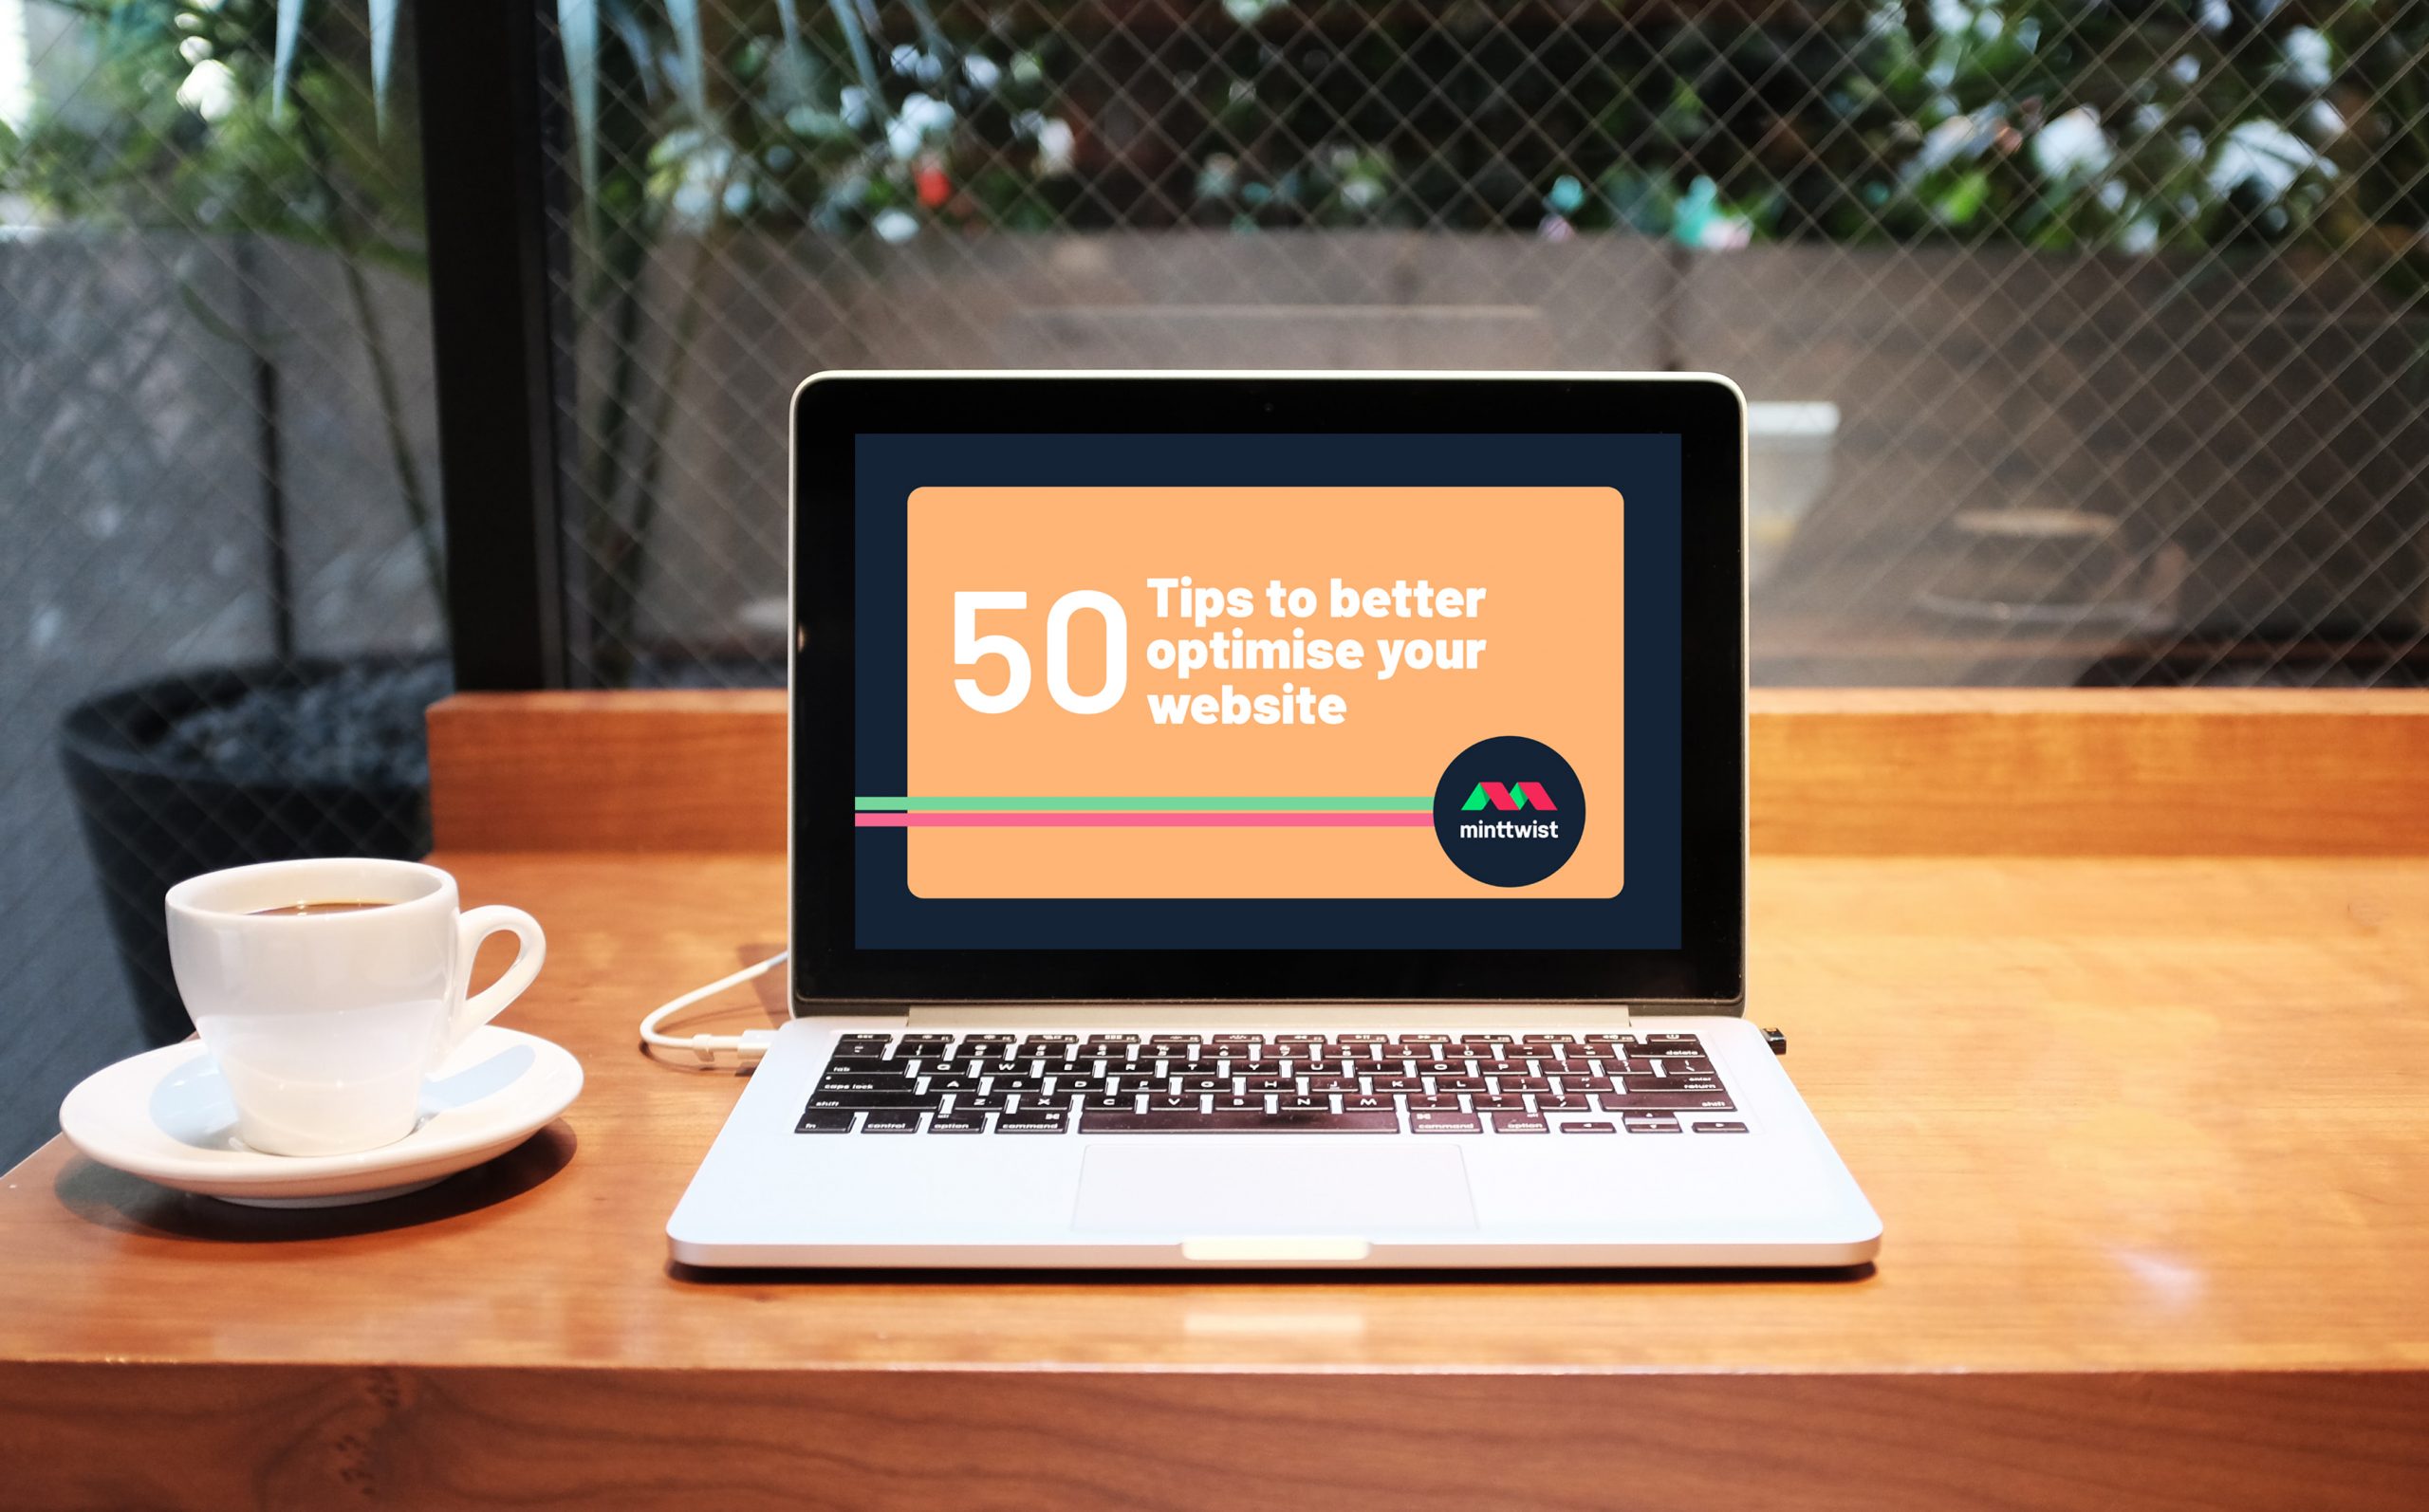 50 Tips to better optimise your website